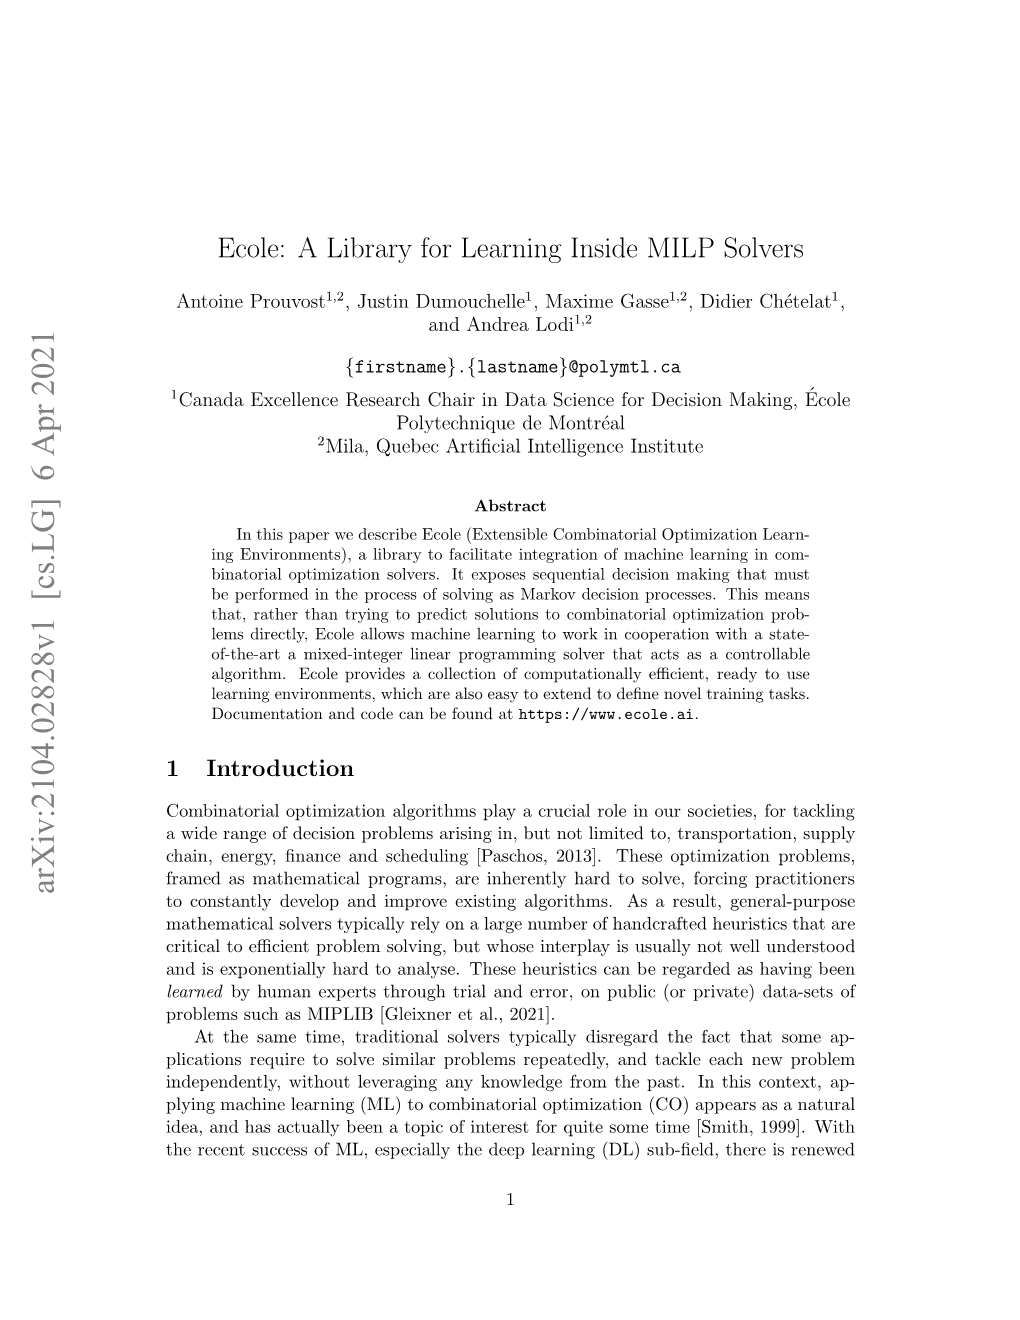 Ecole: a Library for Learning Inside MILP Solvers